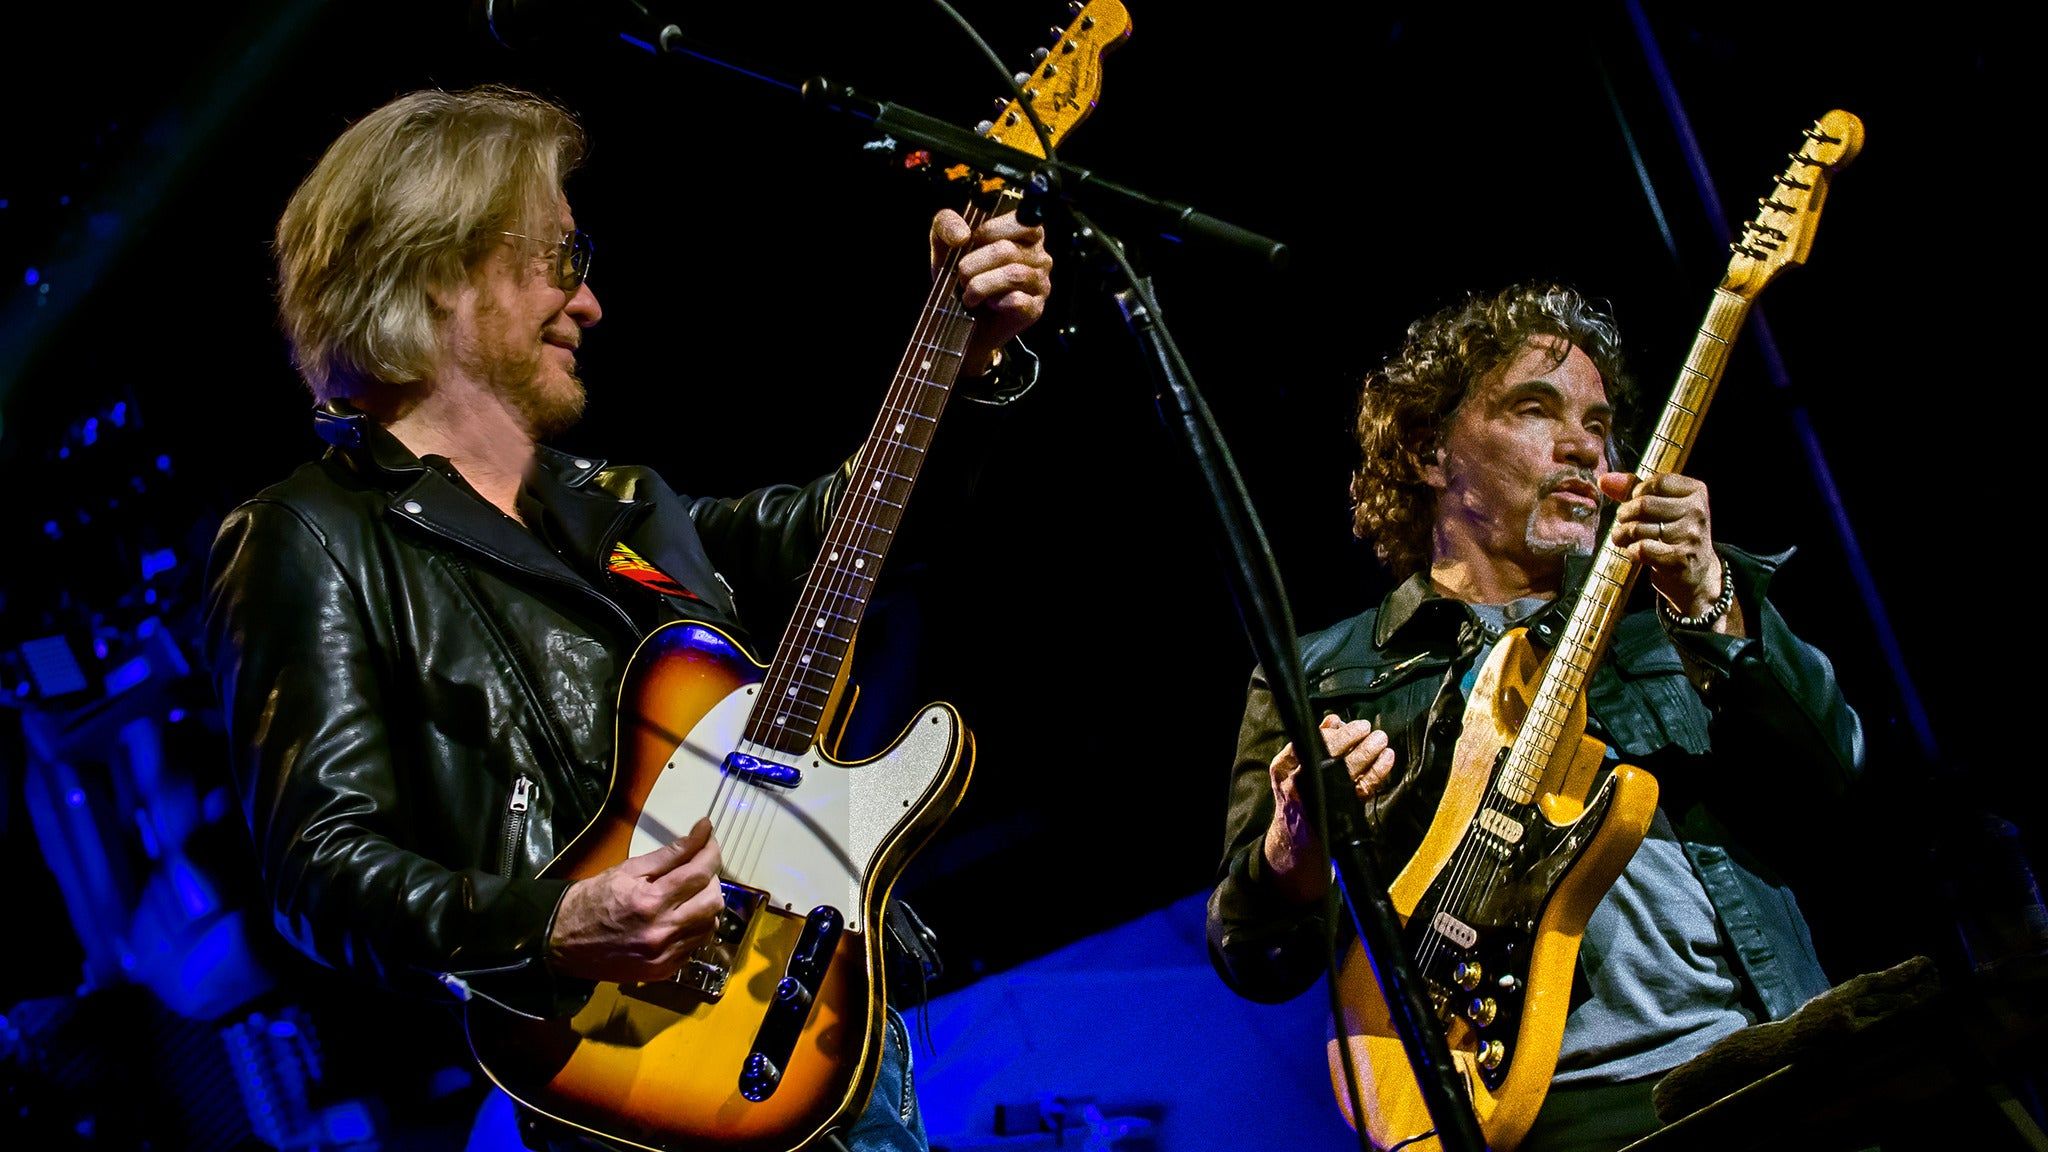 Hall & Oates coming to SPAC. The Daily Gazette